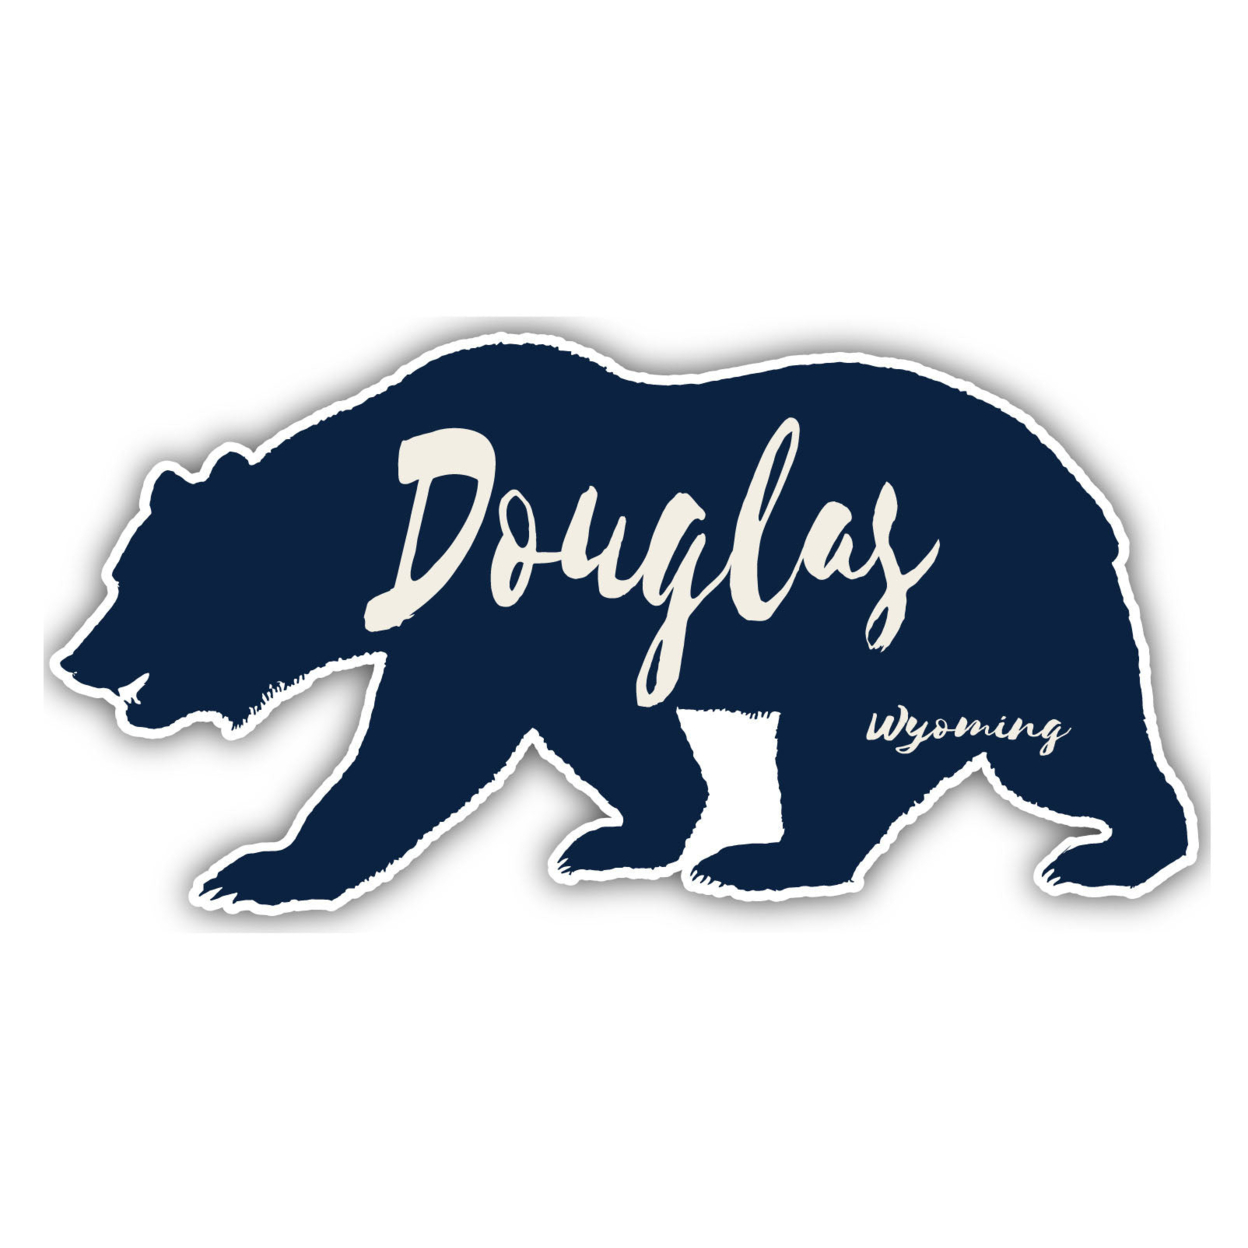 Douglas Wyoming Souvenir Decorative Stickers (Choose Theme And Size) - 4-Pack, 10-Inch, Bear